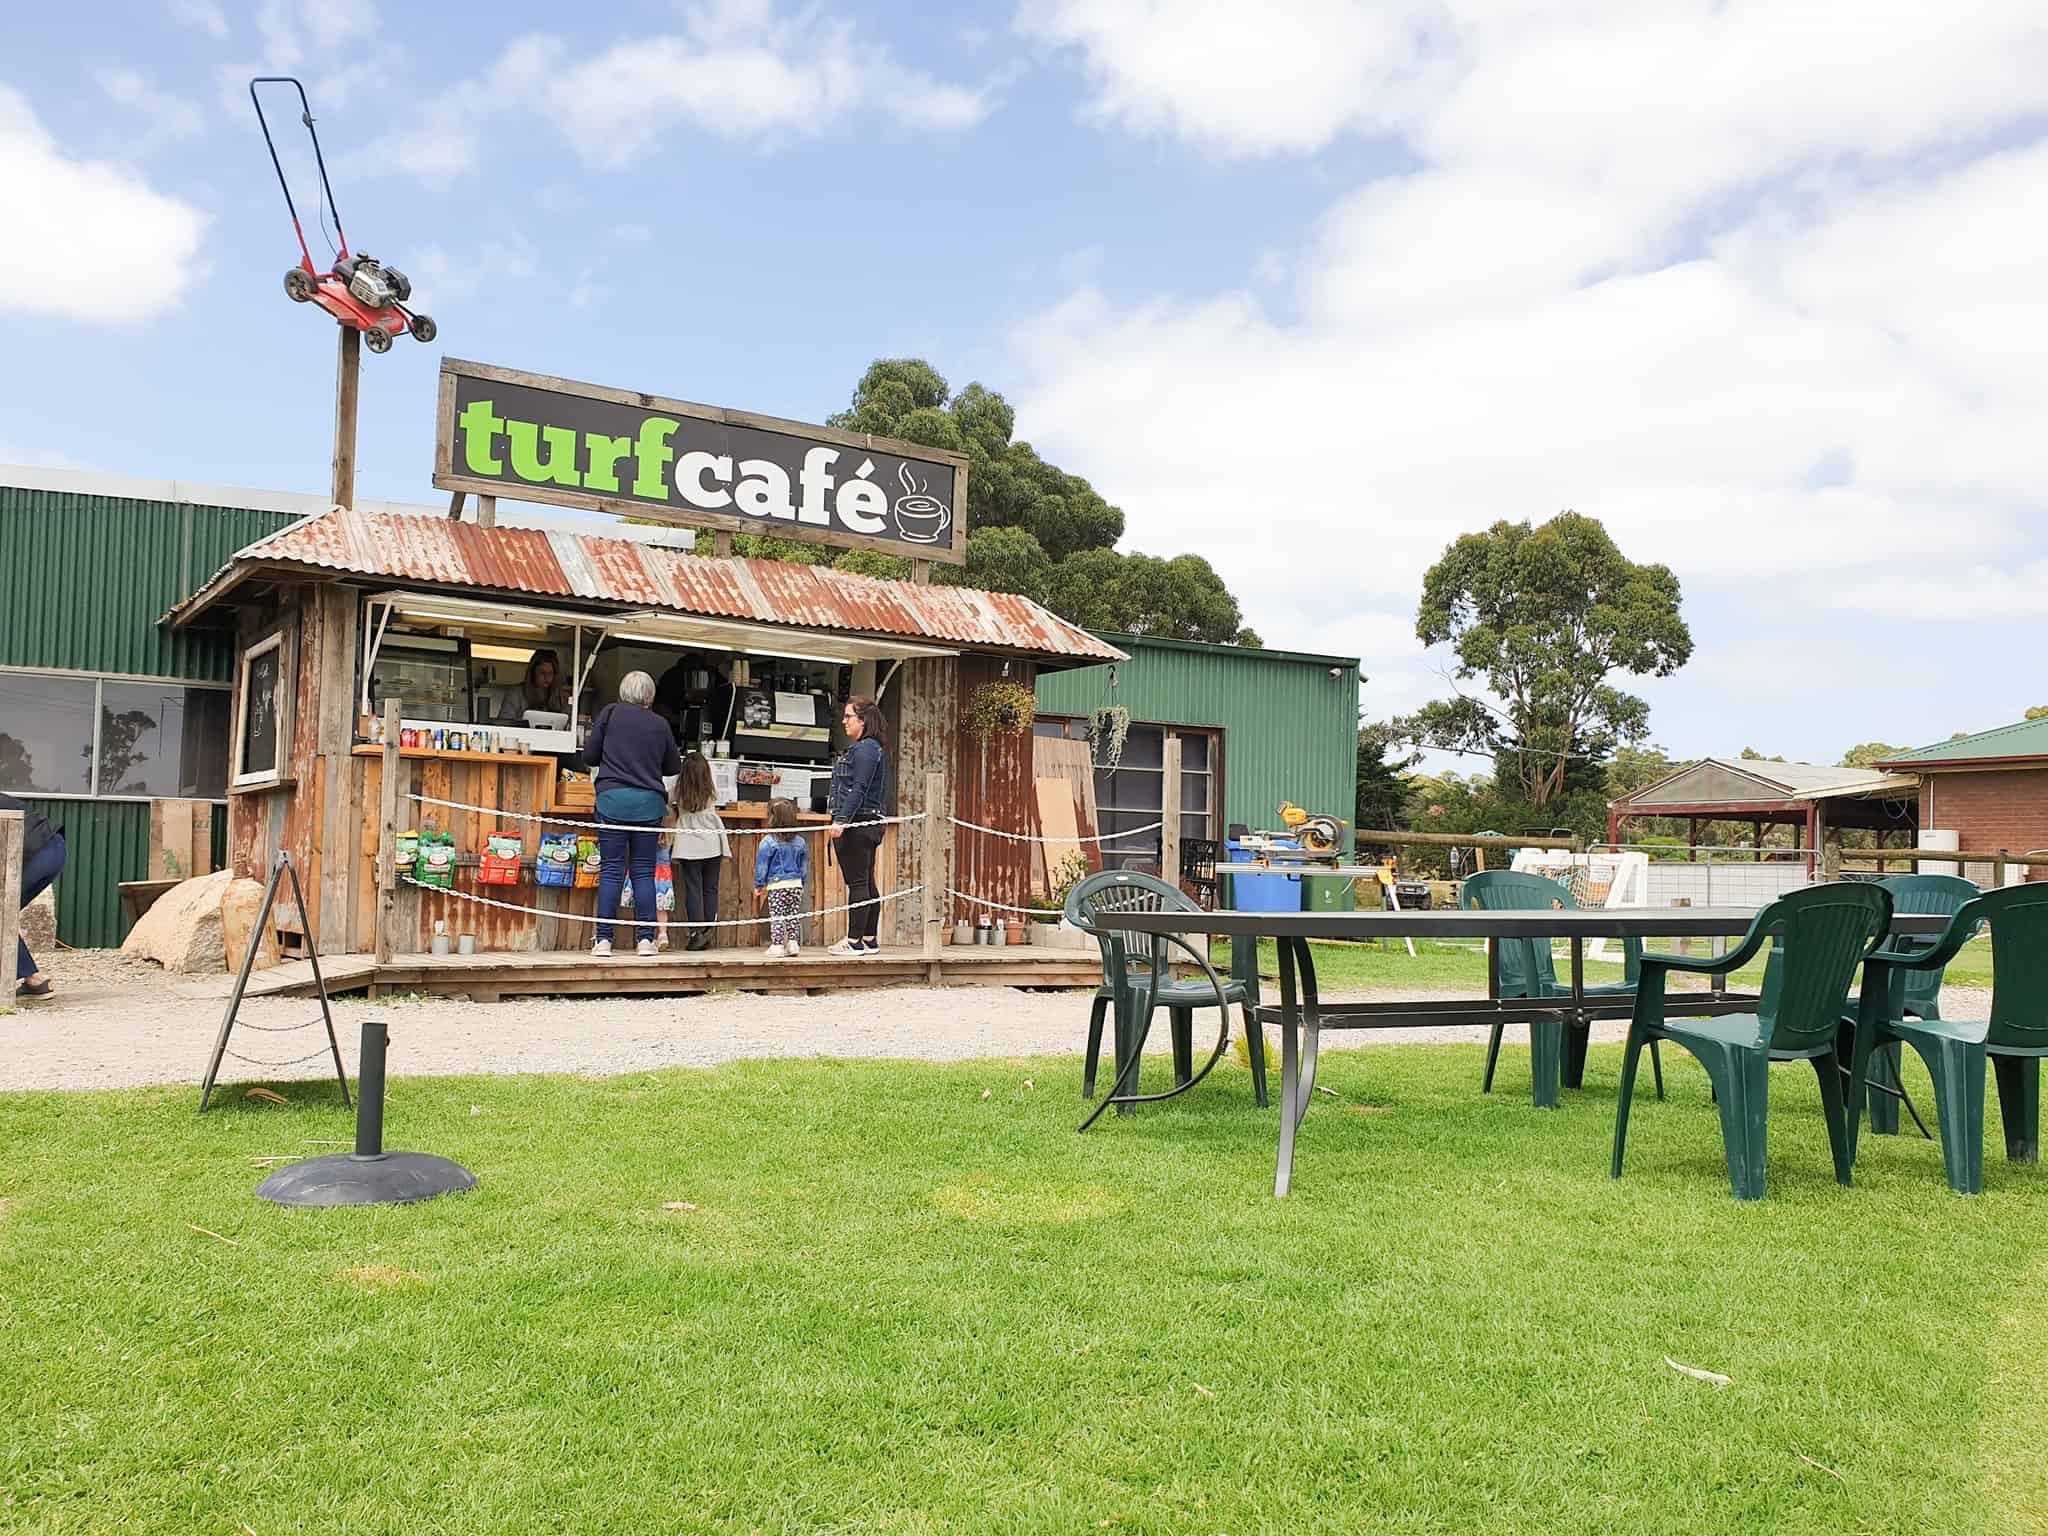 Turfmate Cafe